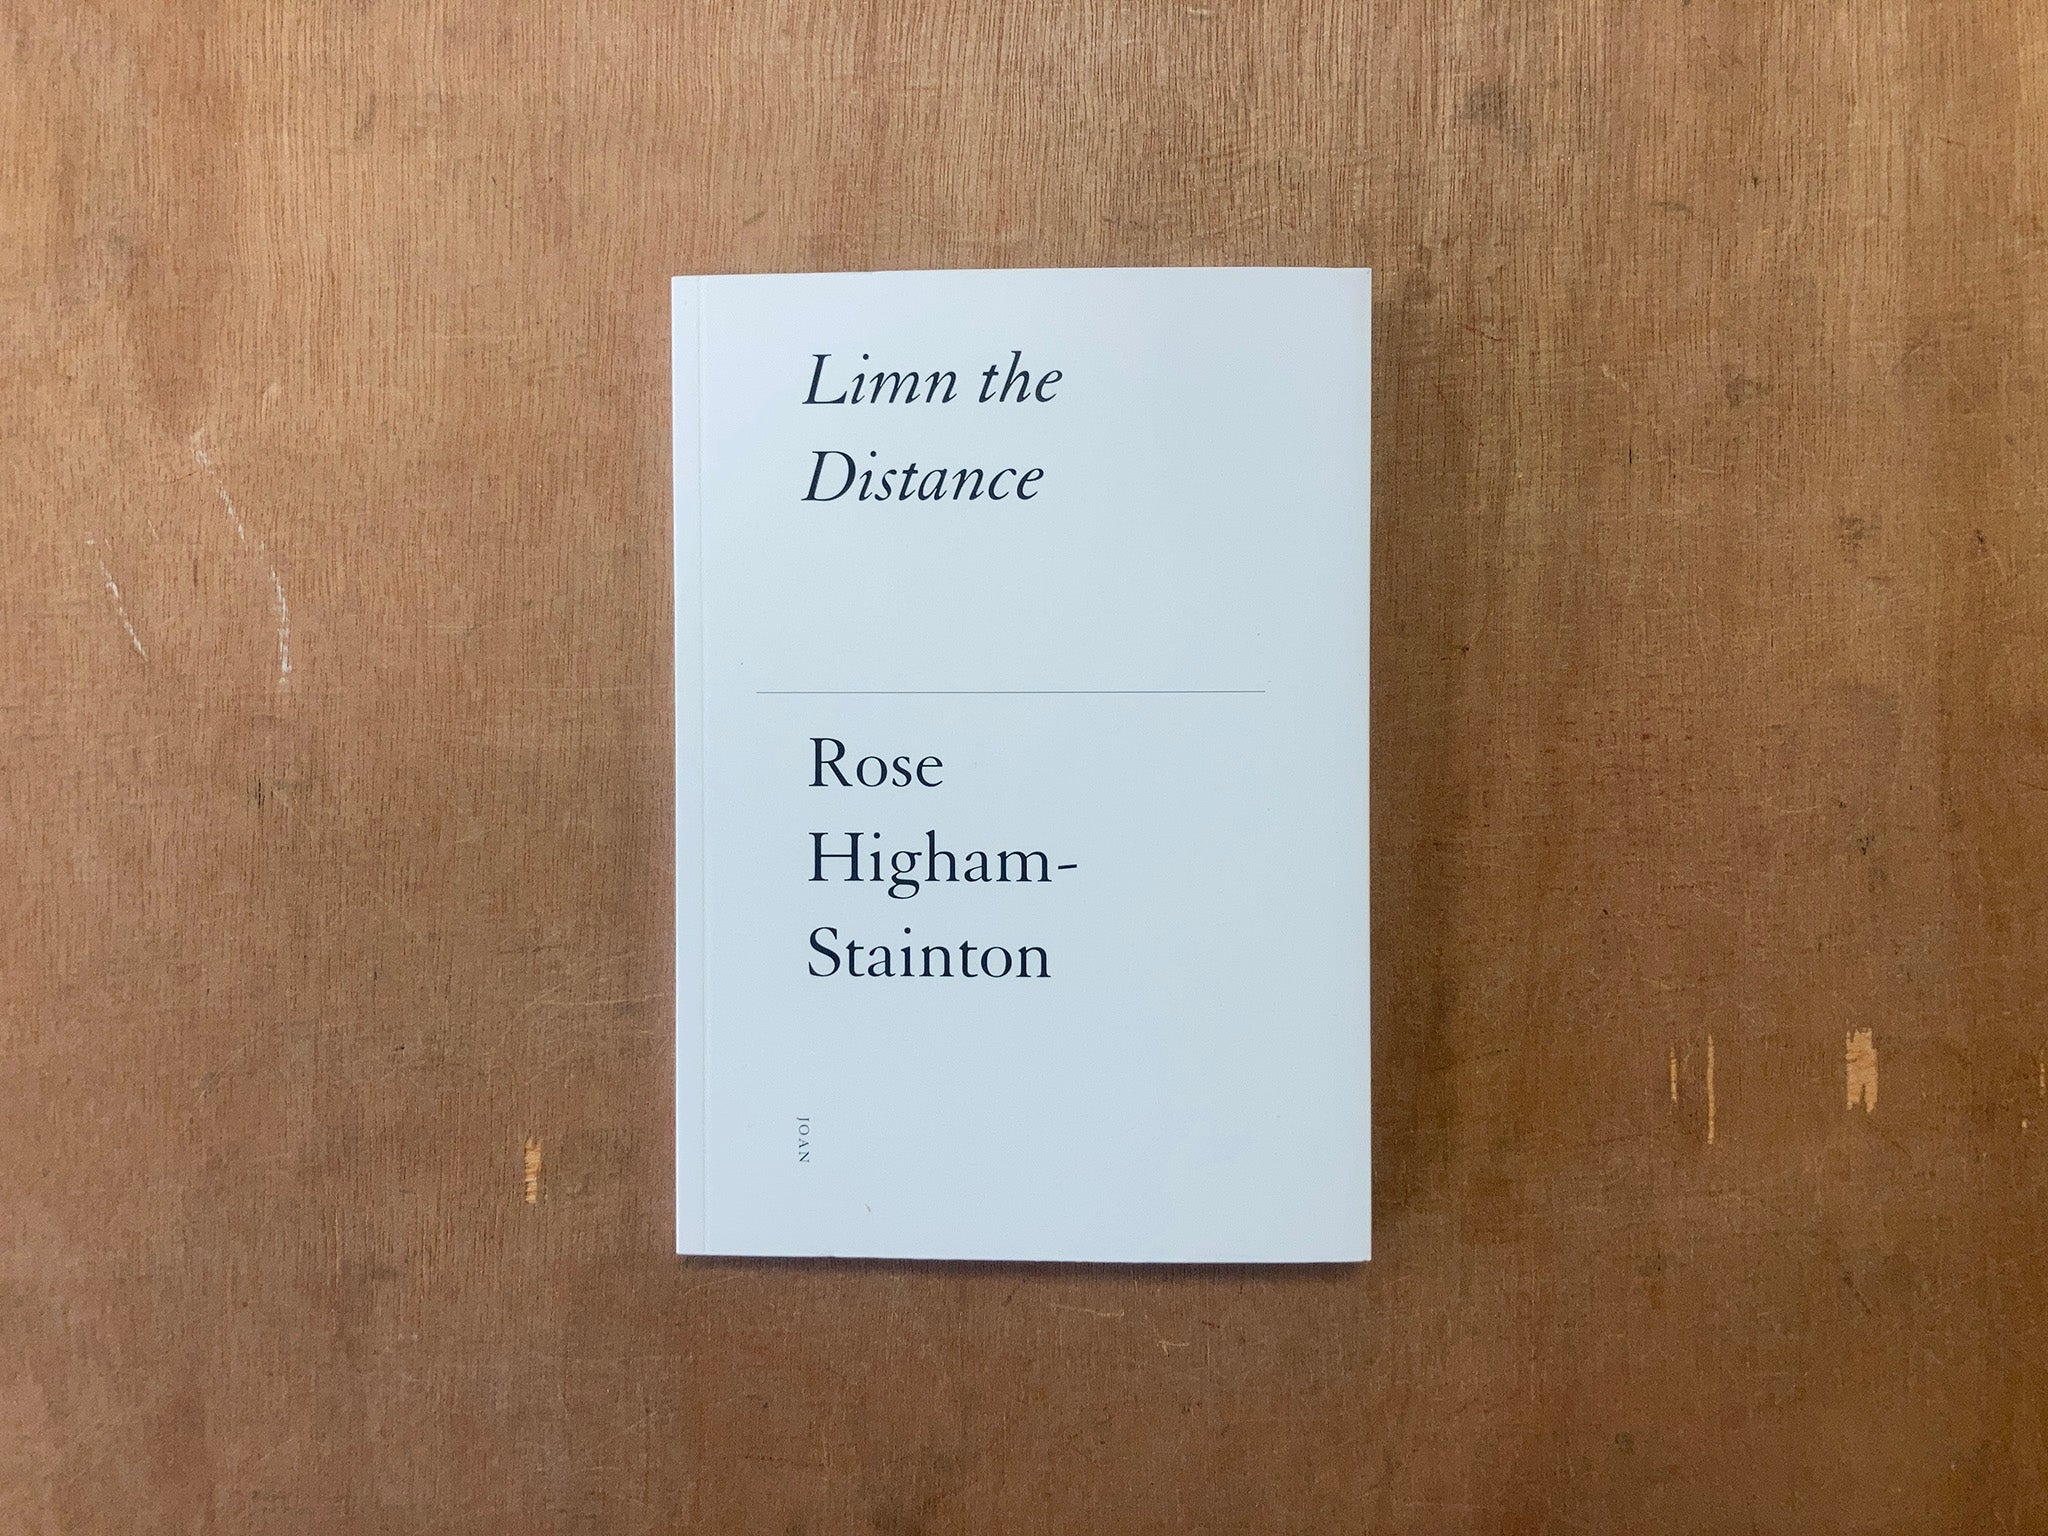 LIMN THE DISTANCE by Rose Higham-Stainton